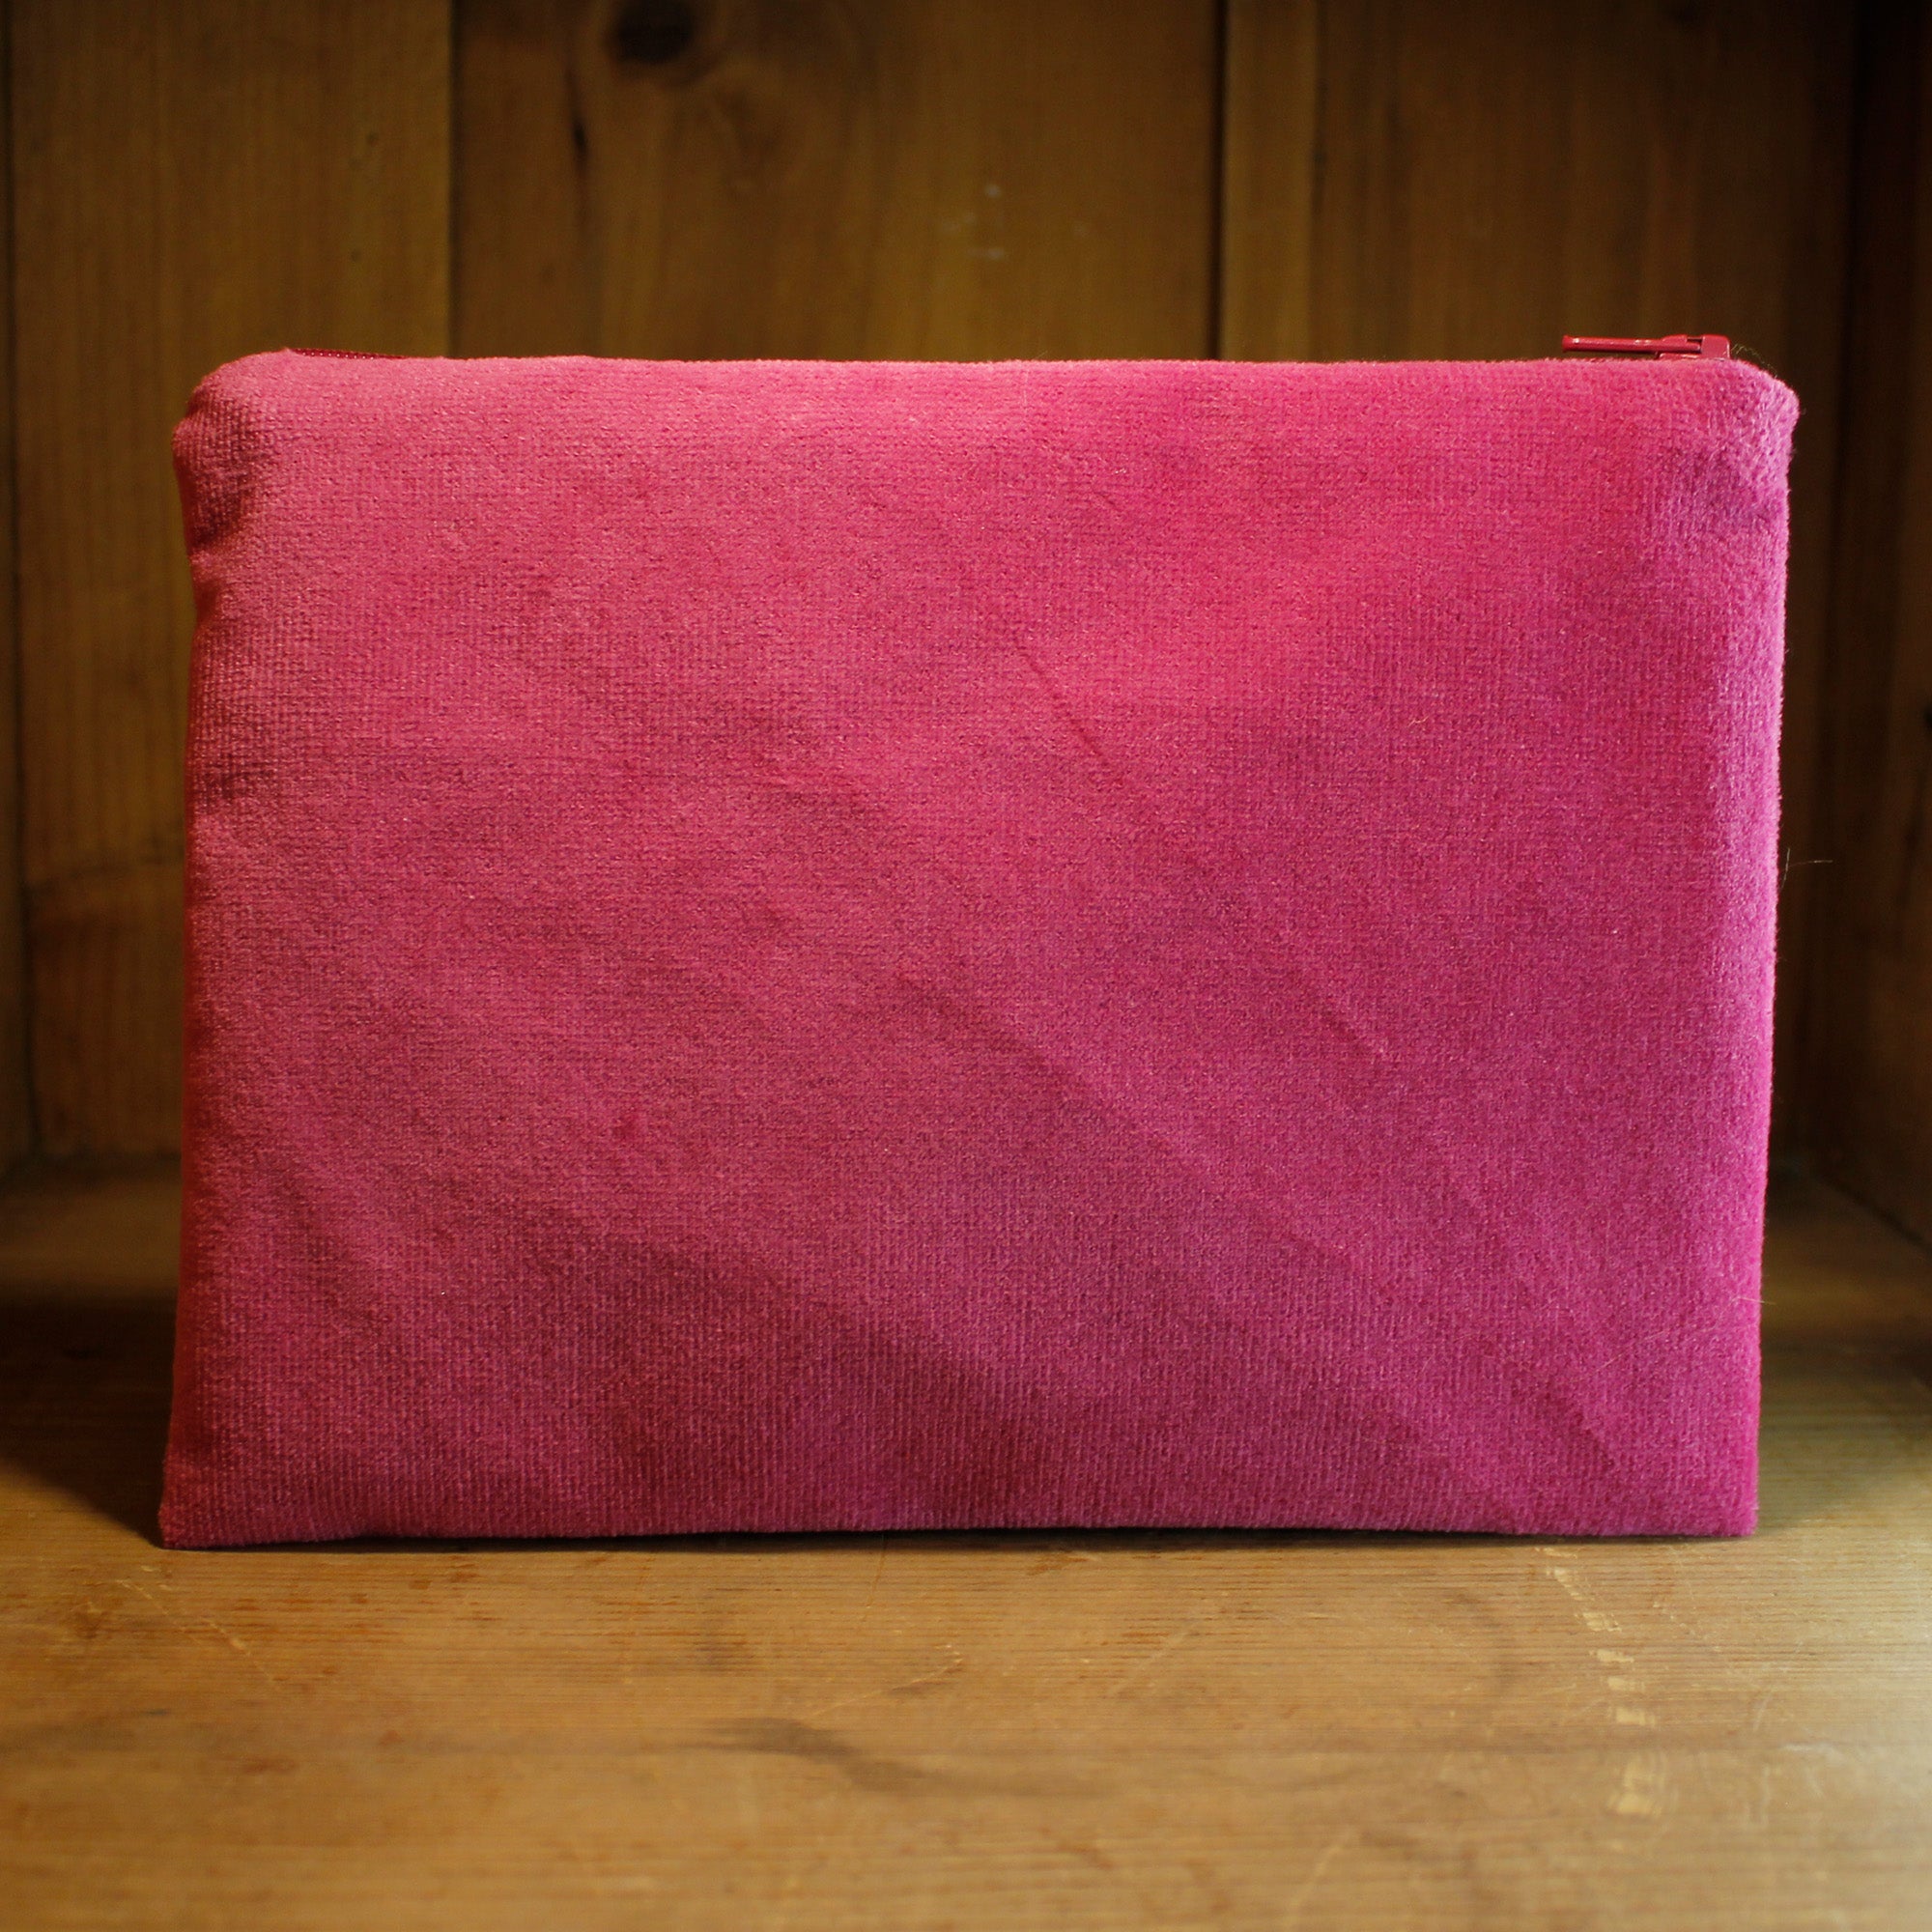 Embroidered Cosmetic Bag "Pink"